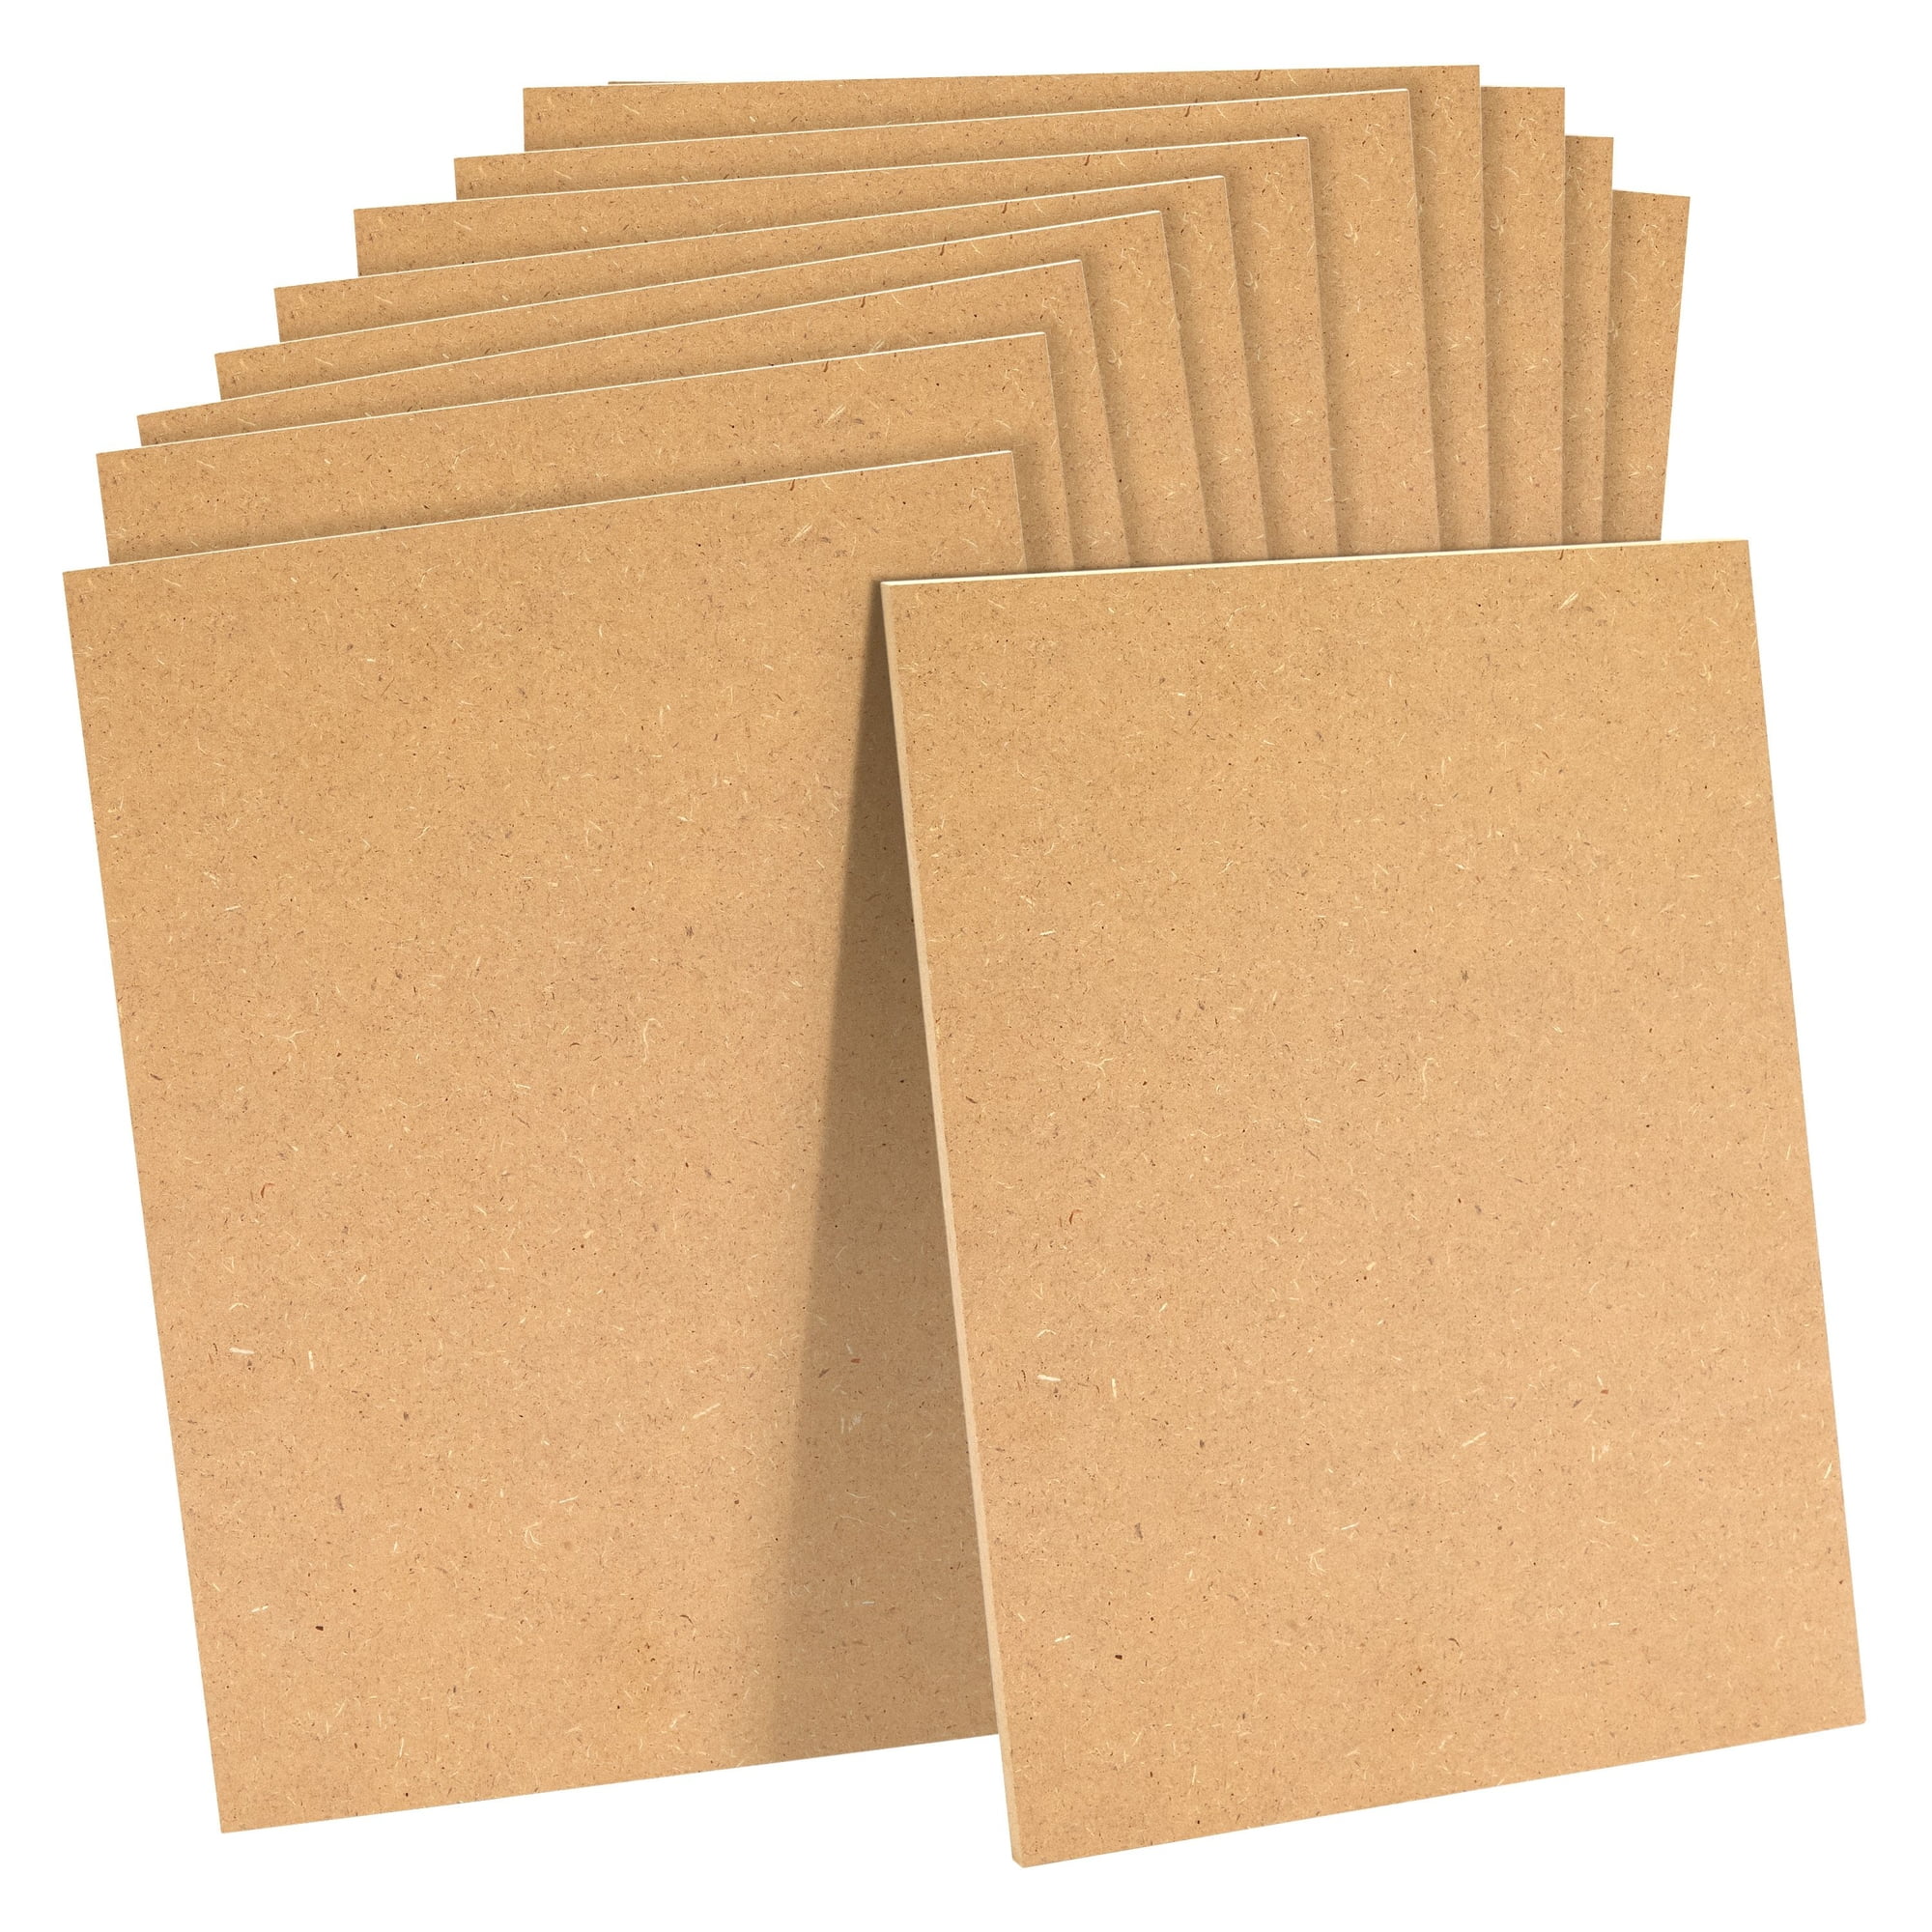 10 Sheets Size A5 Chipboard Cardstock Thick Card White Cardboard Sheet For  Paper Modelling 1mm/1.5